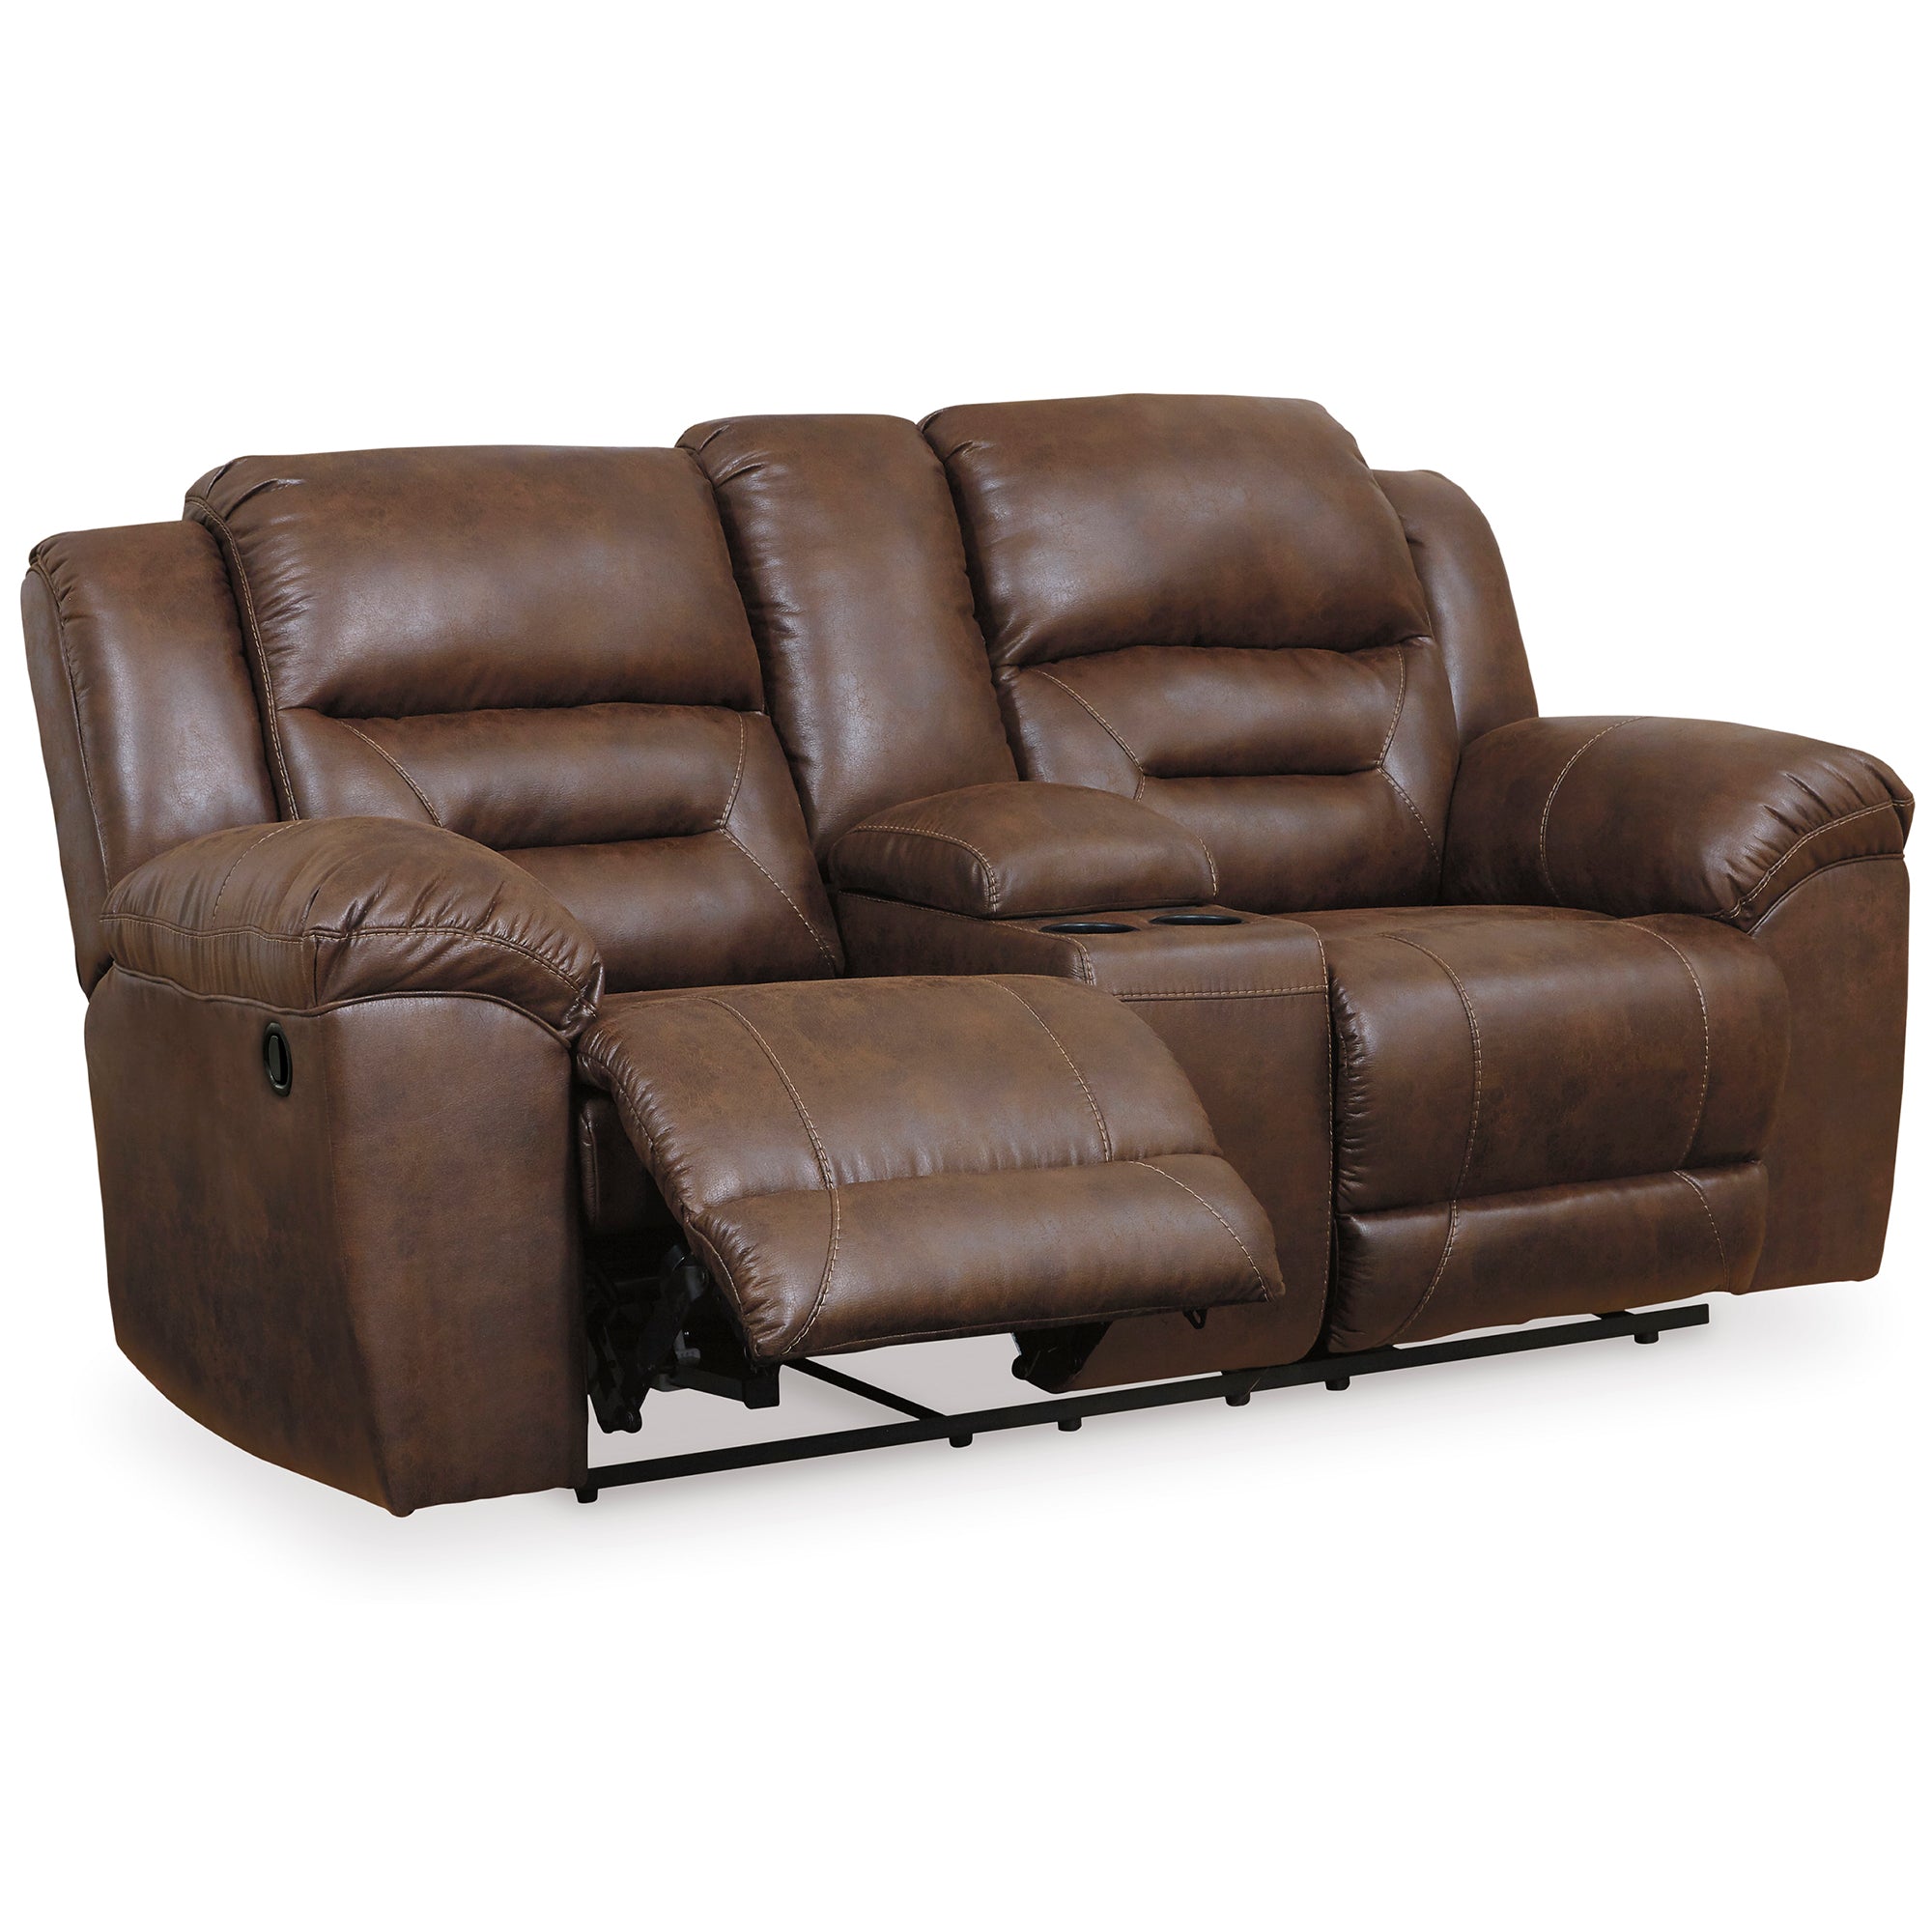 Stoneland Manual Reclining Loveseat with Console